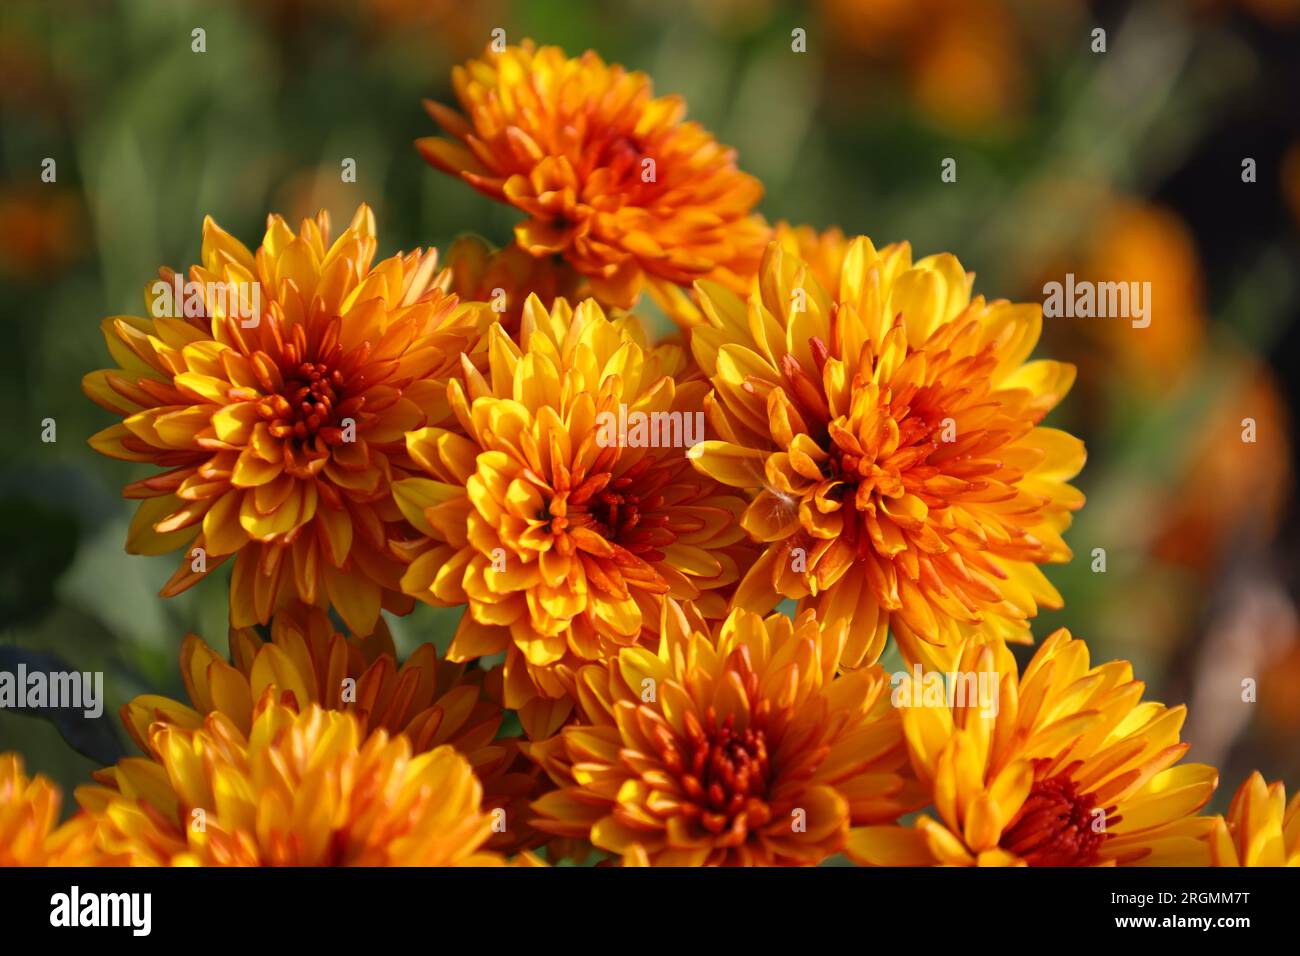 Blossom of orange bright chrysanthemums in autumn. Mums or chrysanths from the Asteraceae family. Fall background for a beautiful greeting card. The Stock Photo